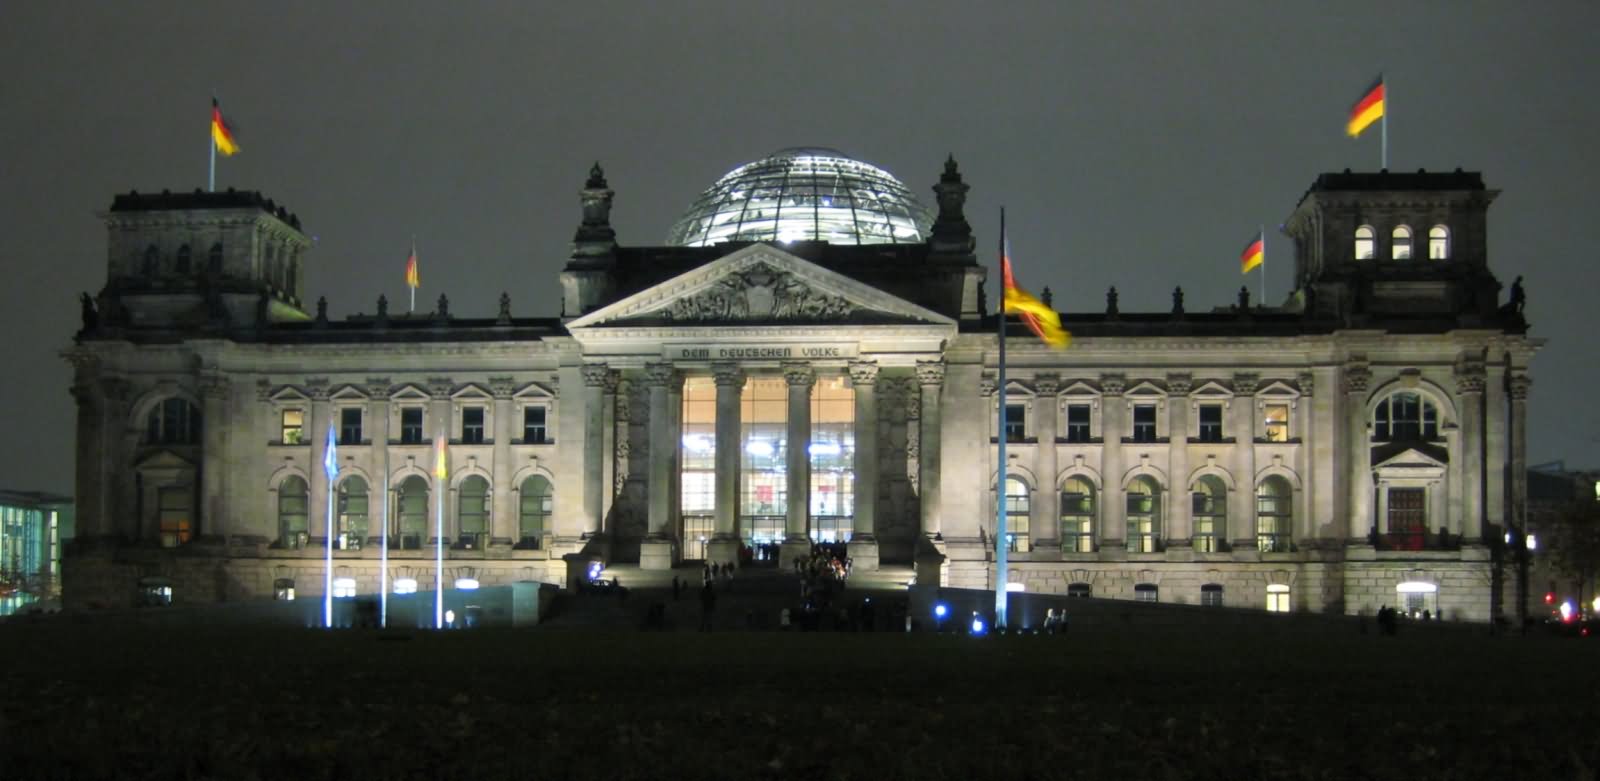 The Reichstag Building In Berlin At Night